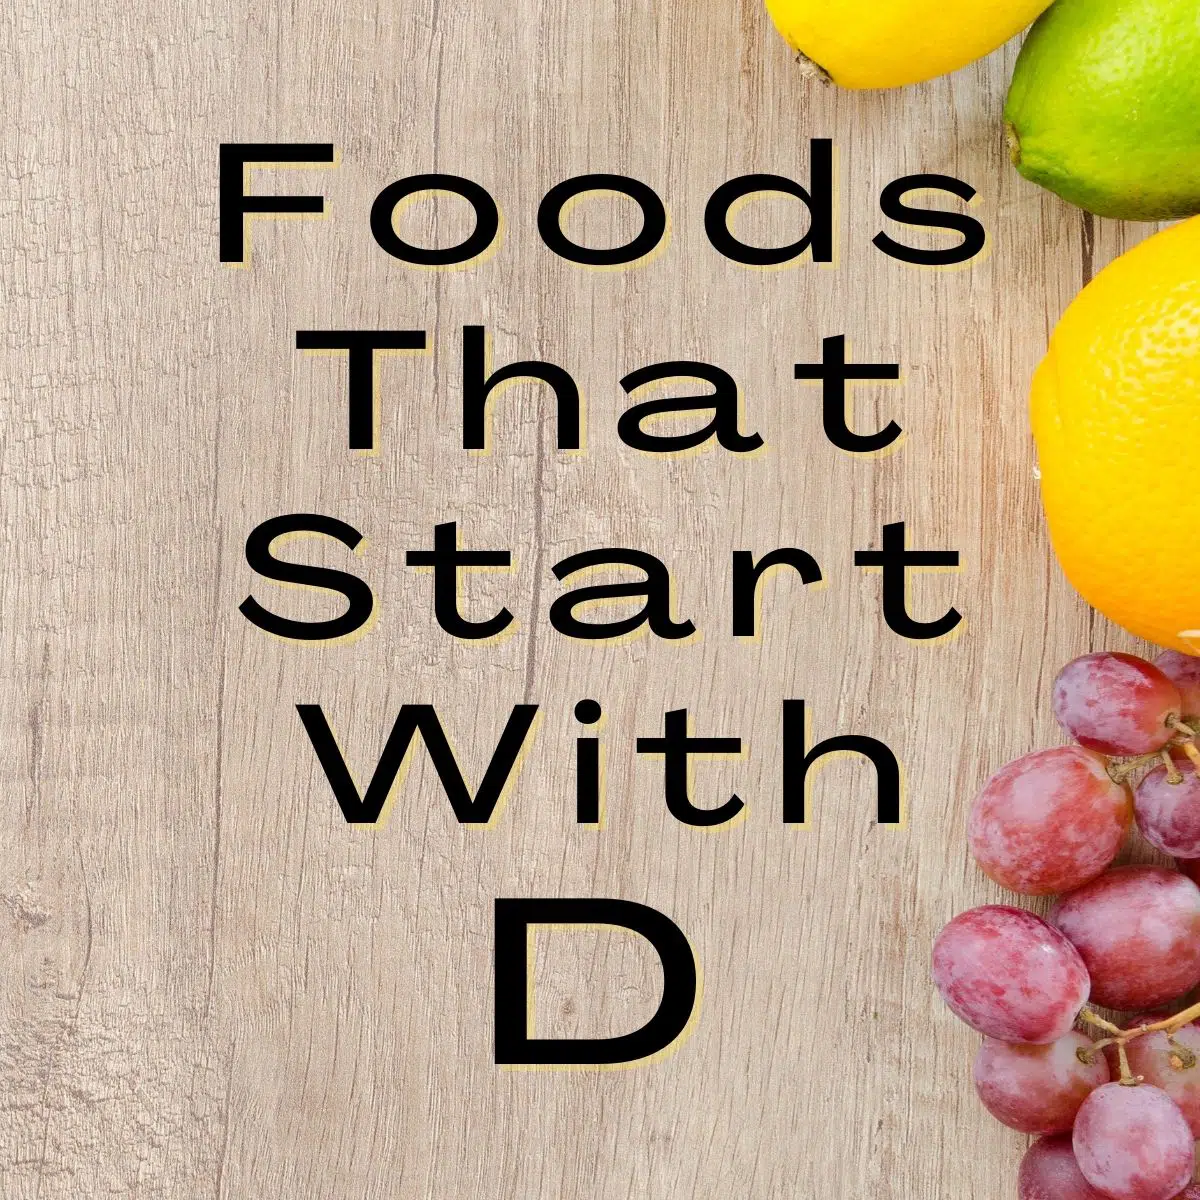 Foods that begin with the letter d text on a wood backgound.